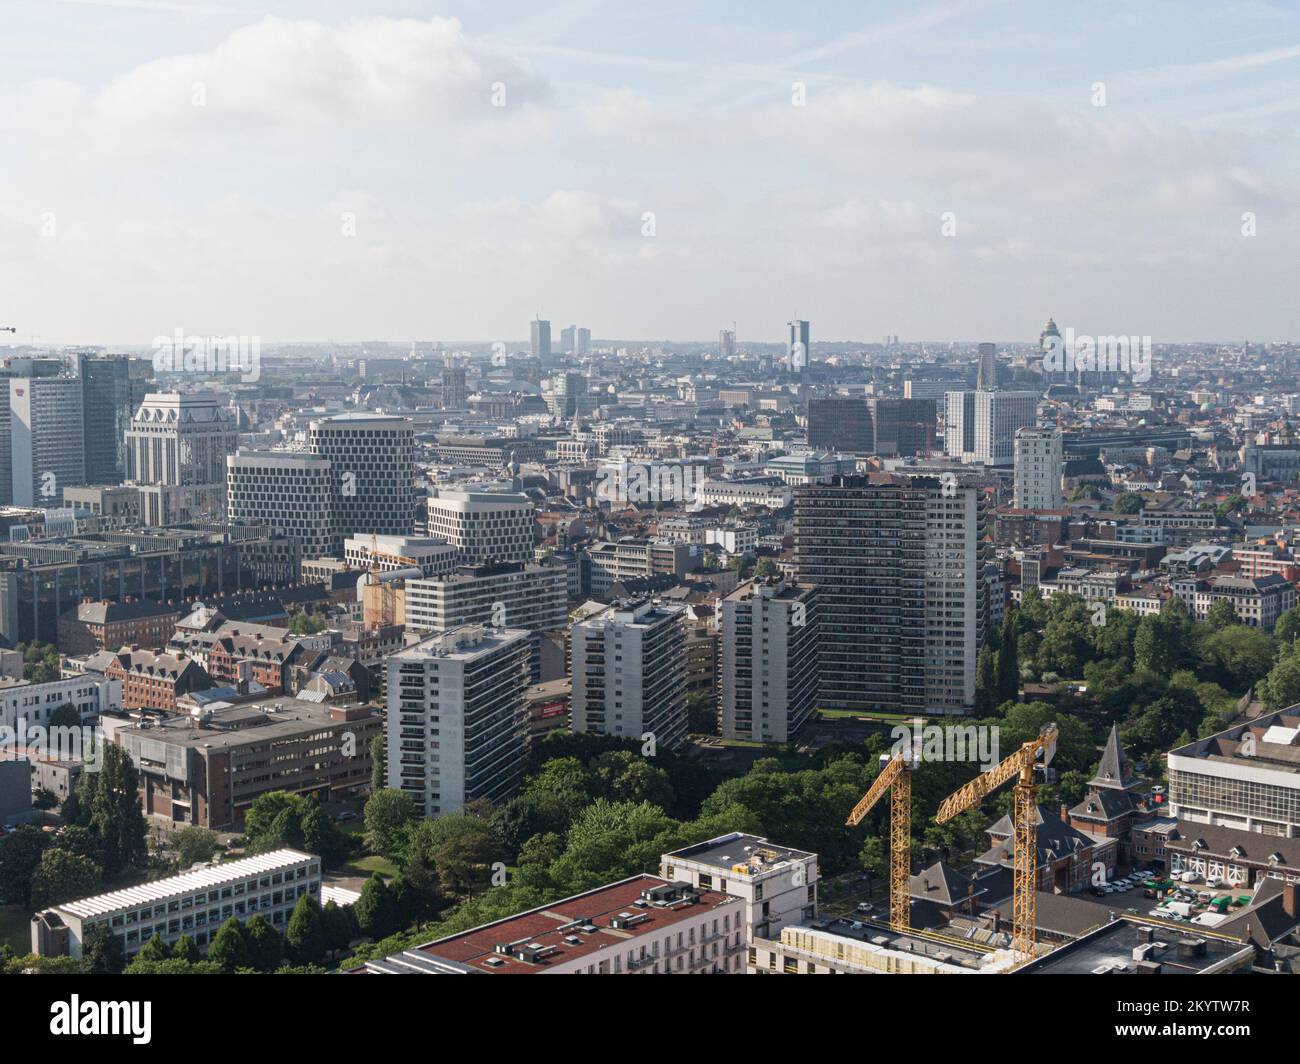 Brussels, Belgium - May 12, 2022: Urban landscape of the city of Brussels. Office district mixed with residential buildings in a residential area. Stock Photo